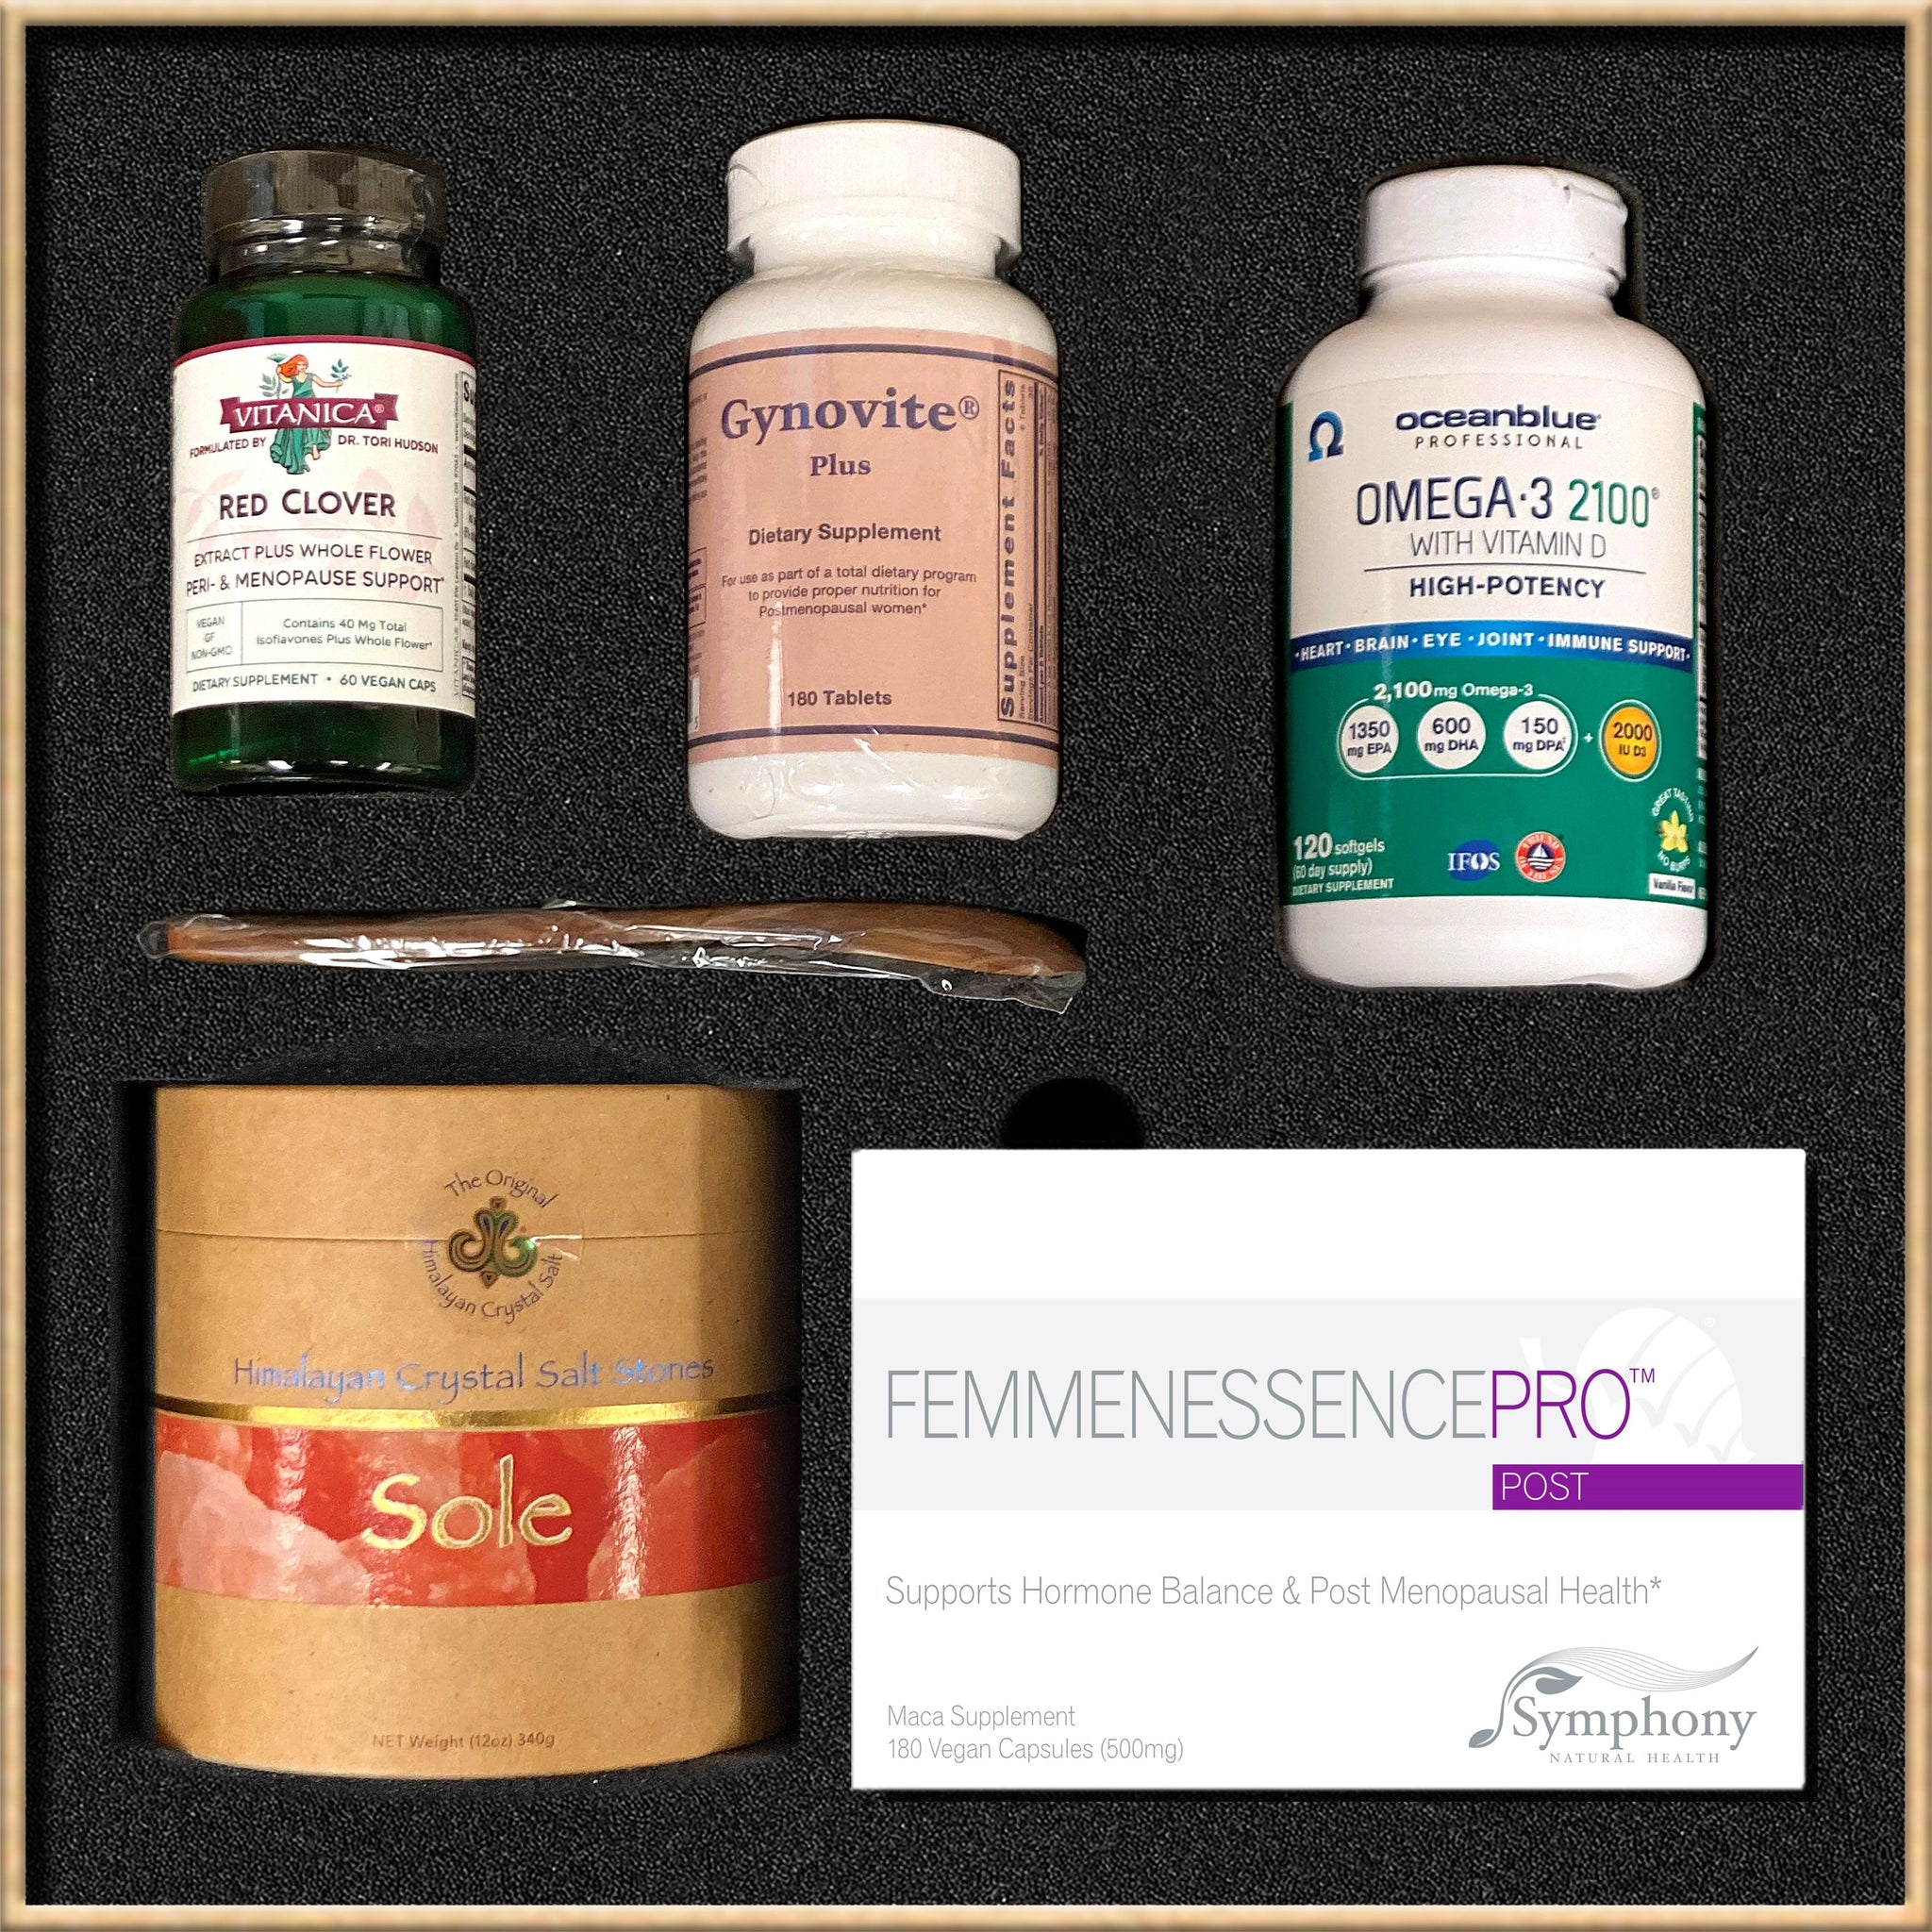 Midlife Refuel Box for Post Menopause open product box showing contents